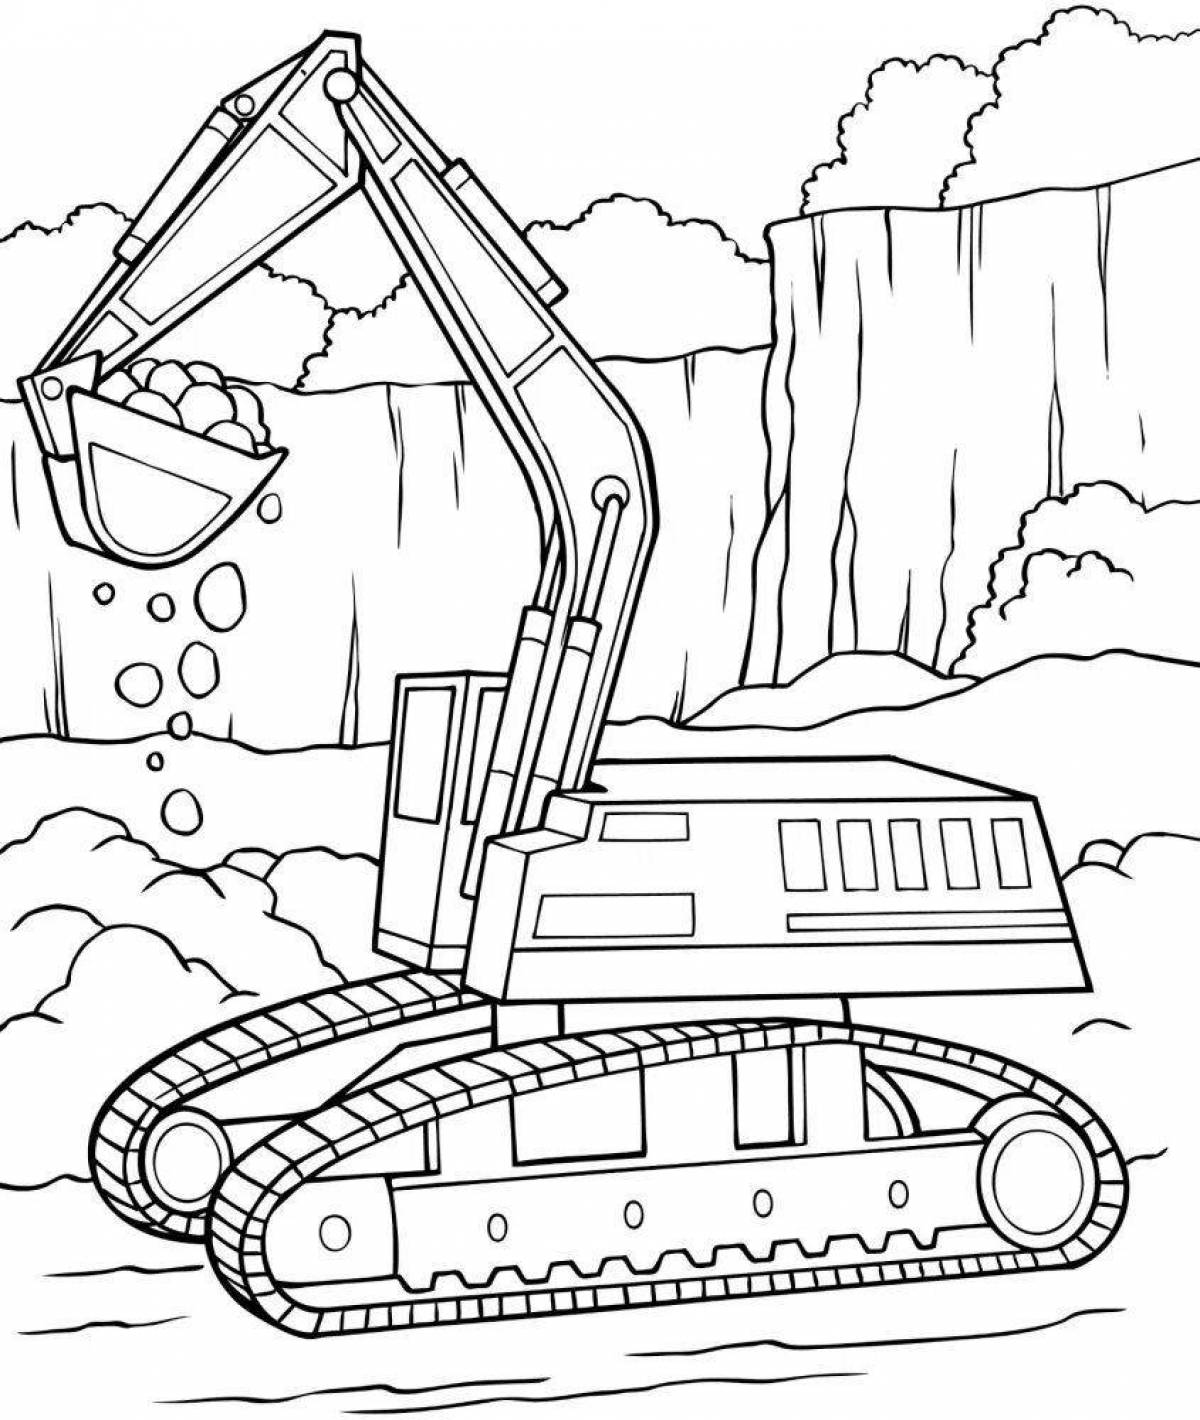 Colorful excavator coloring page for boys